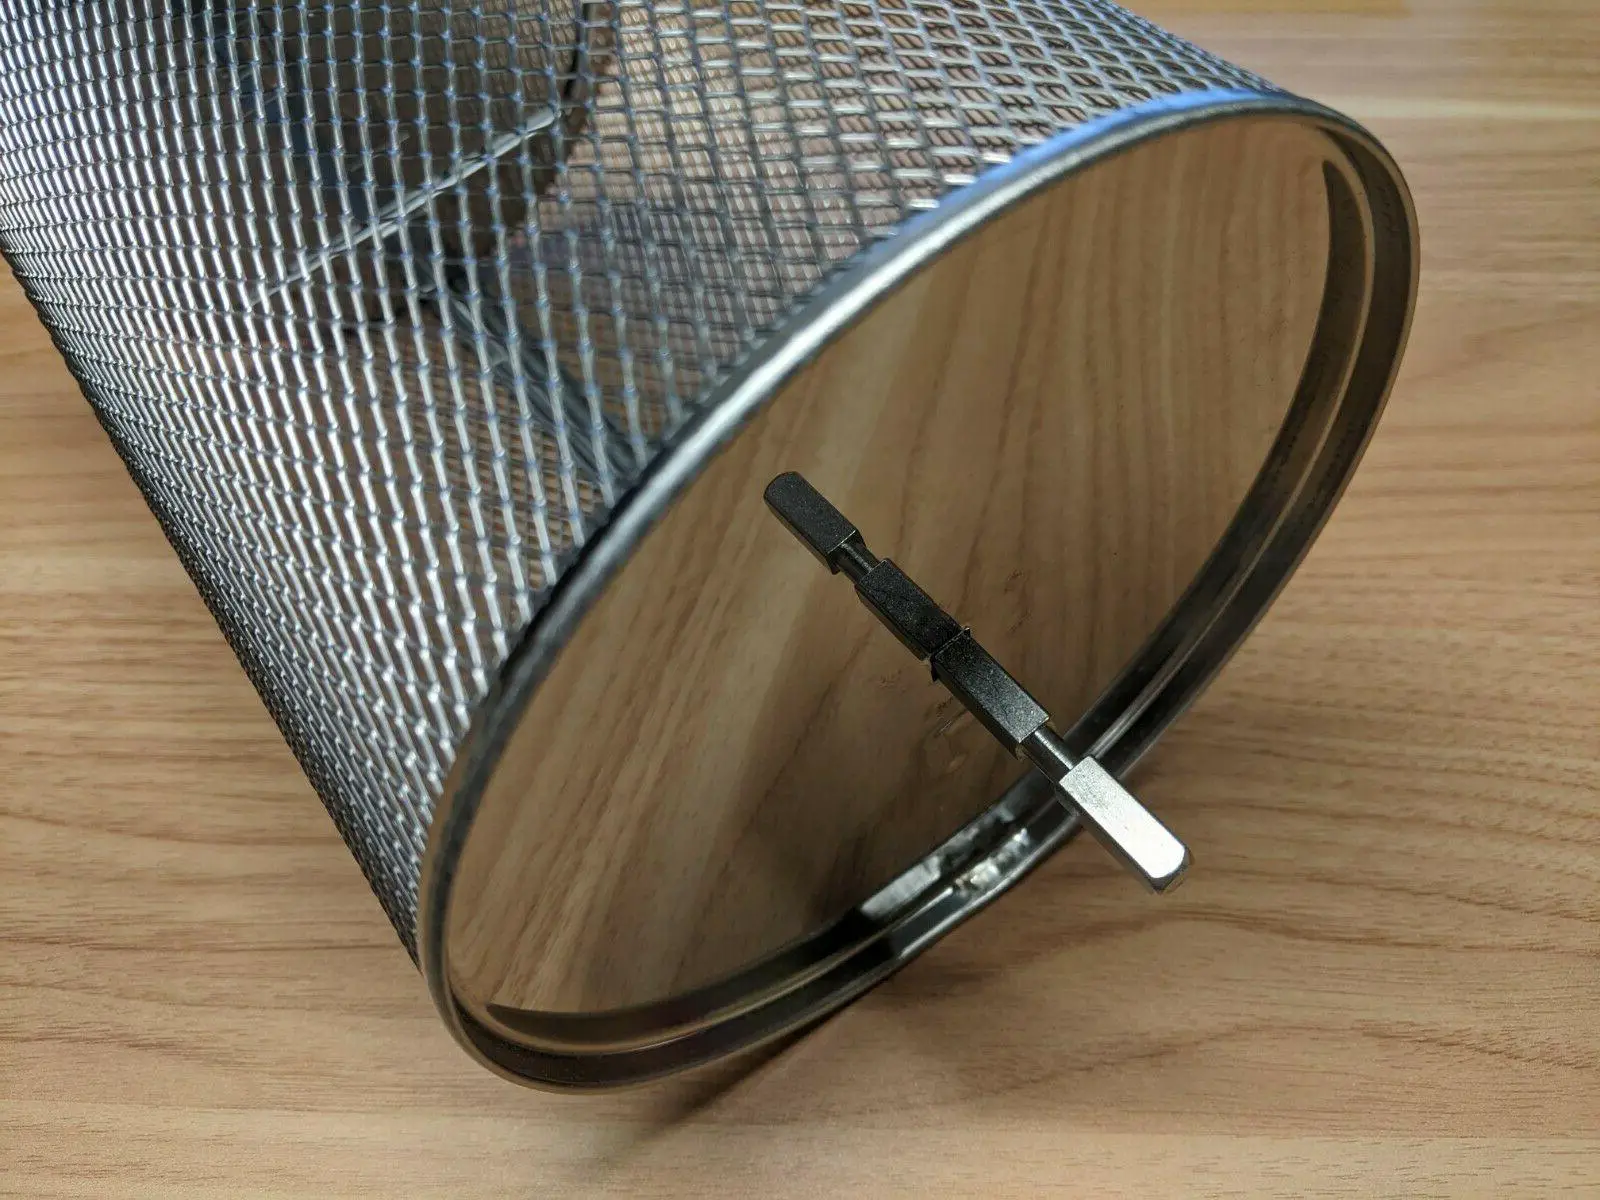 Tristar Power Air Fryer Oven Mesh Basket Replacement